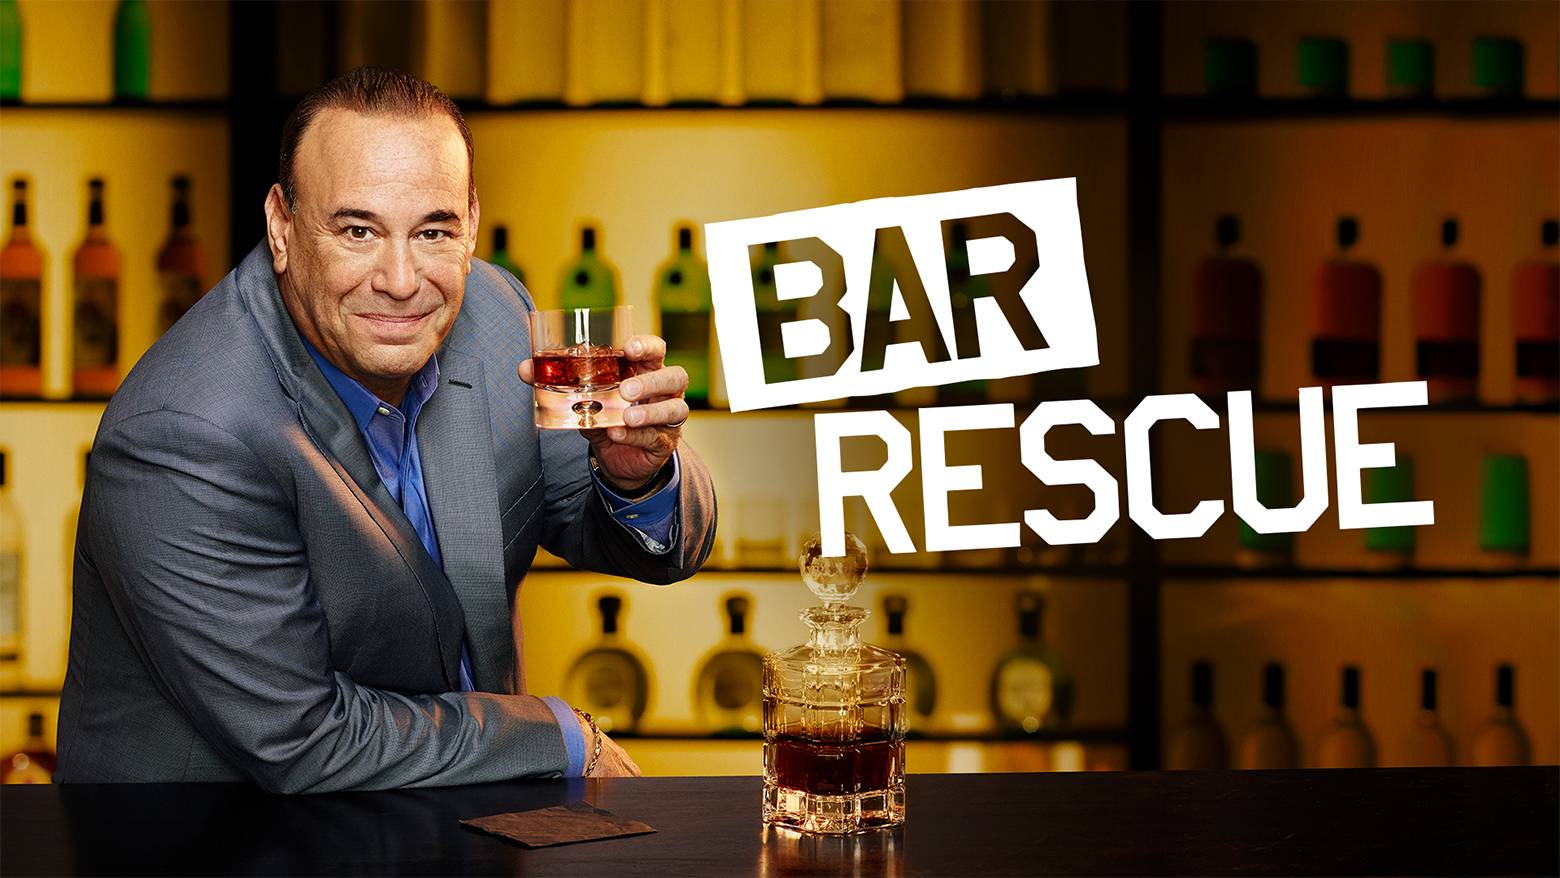 How To Watch Bar Rescue